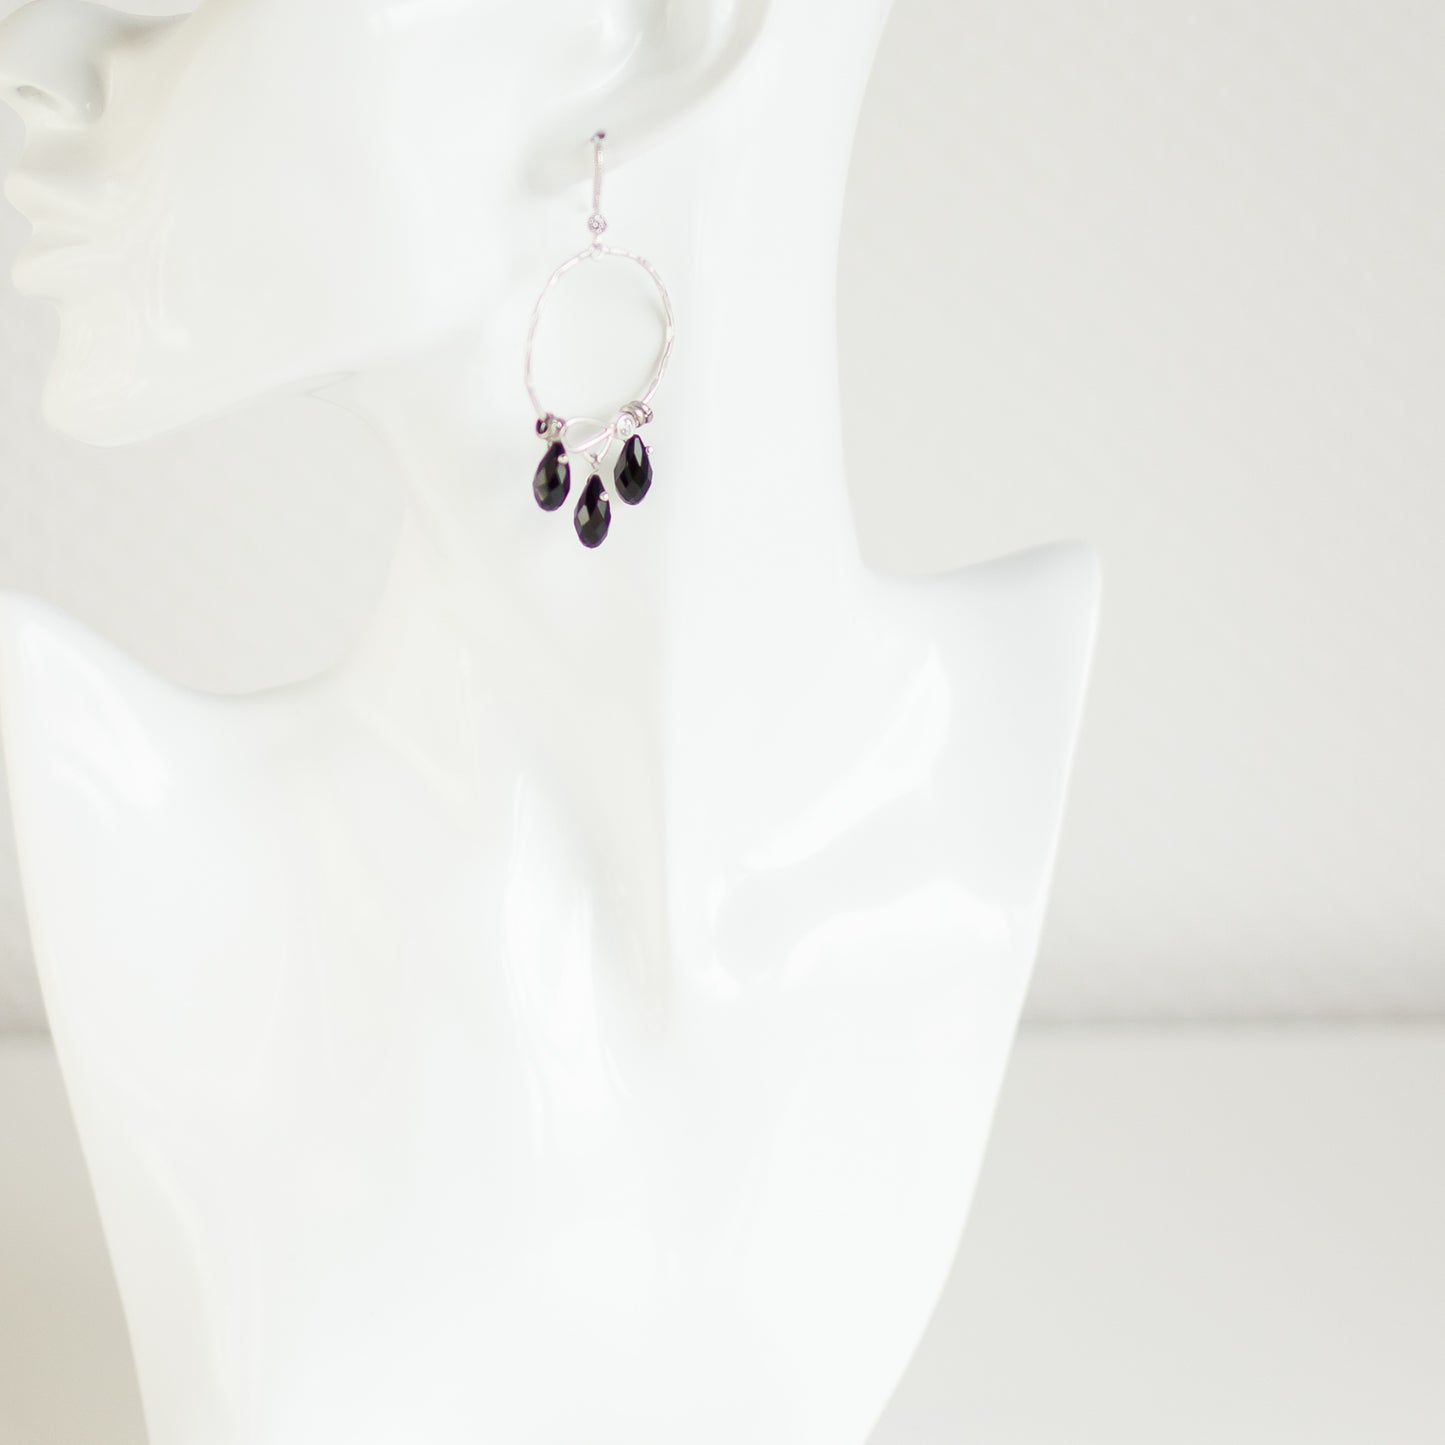 Discover the elegant round hoop earrings with black drop crystals, perfect for women, teens, and girls. This classic jewelry piece makes an ideal gift.